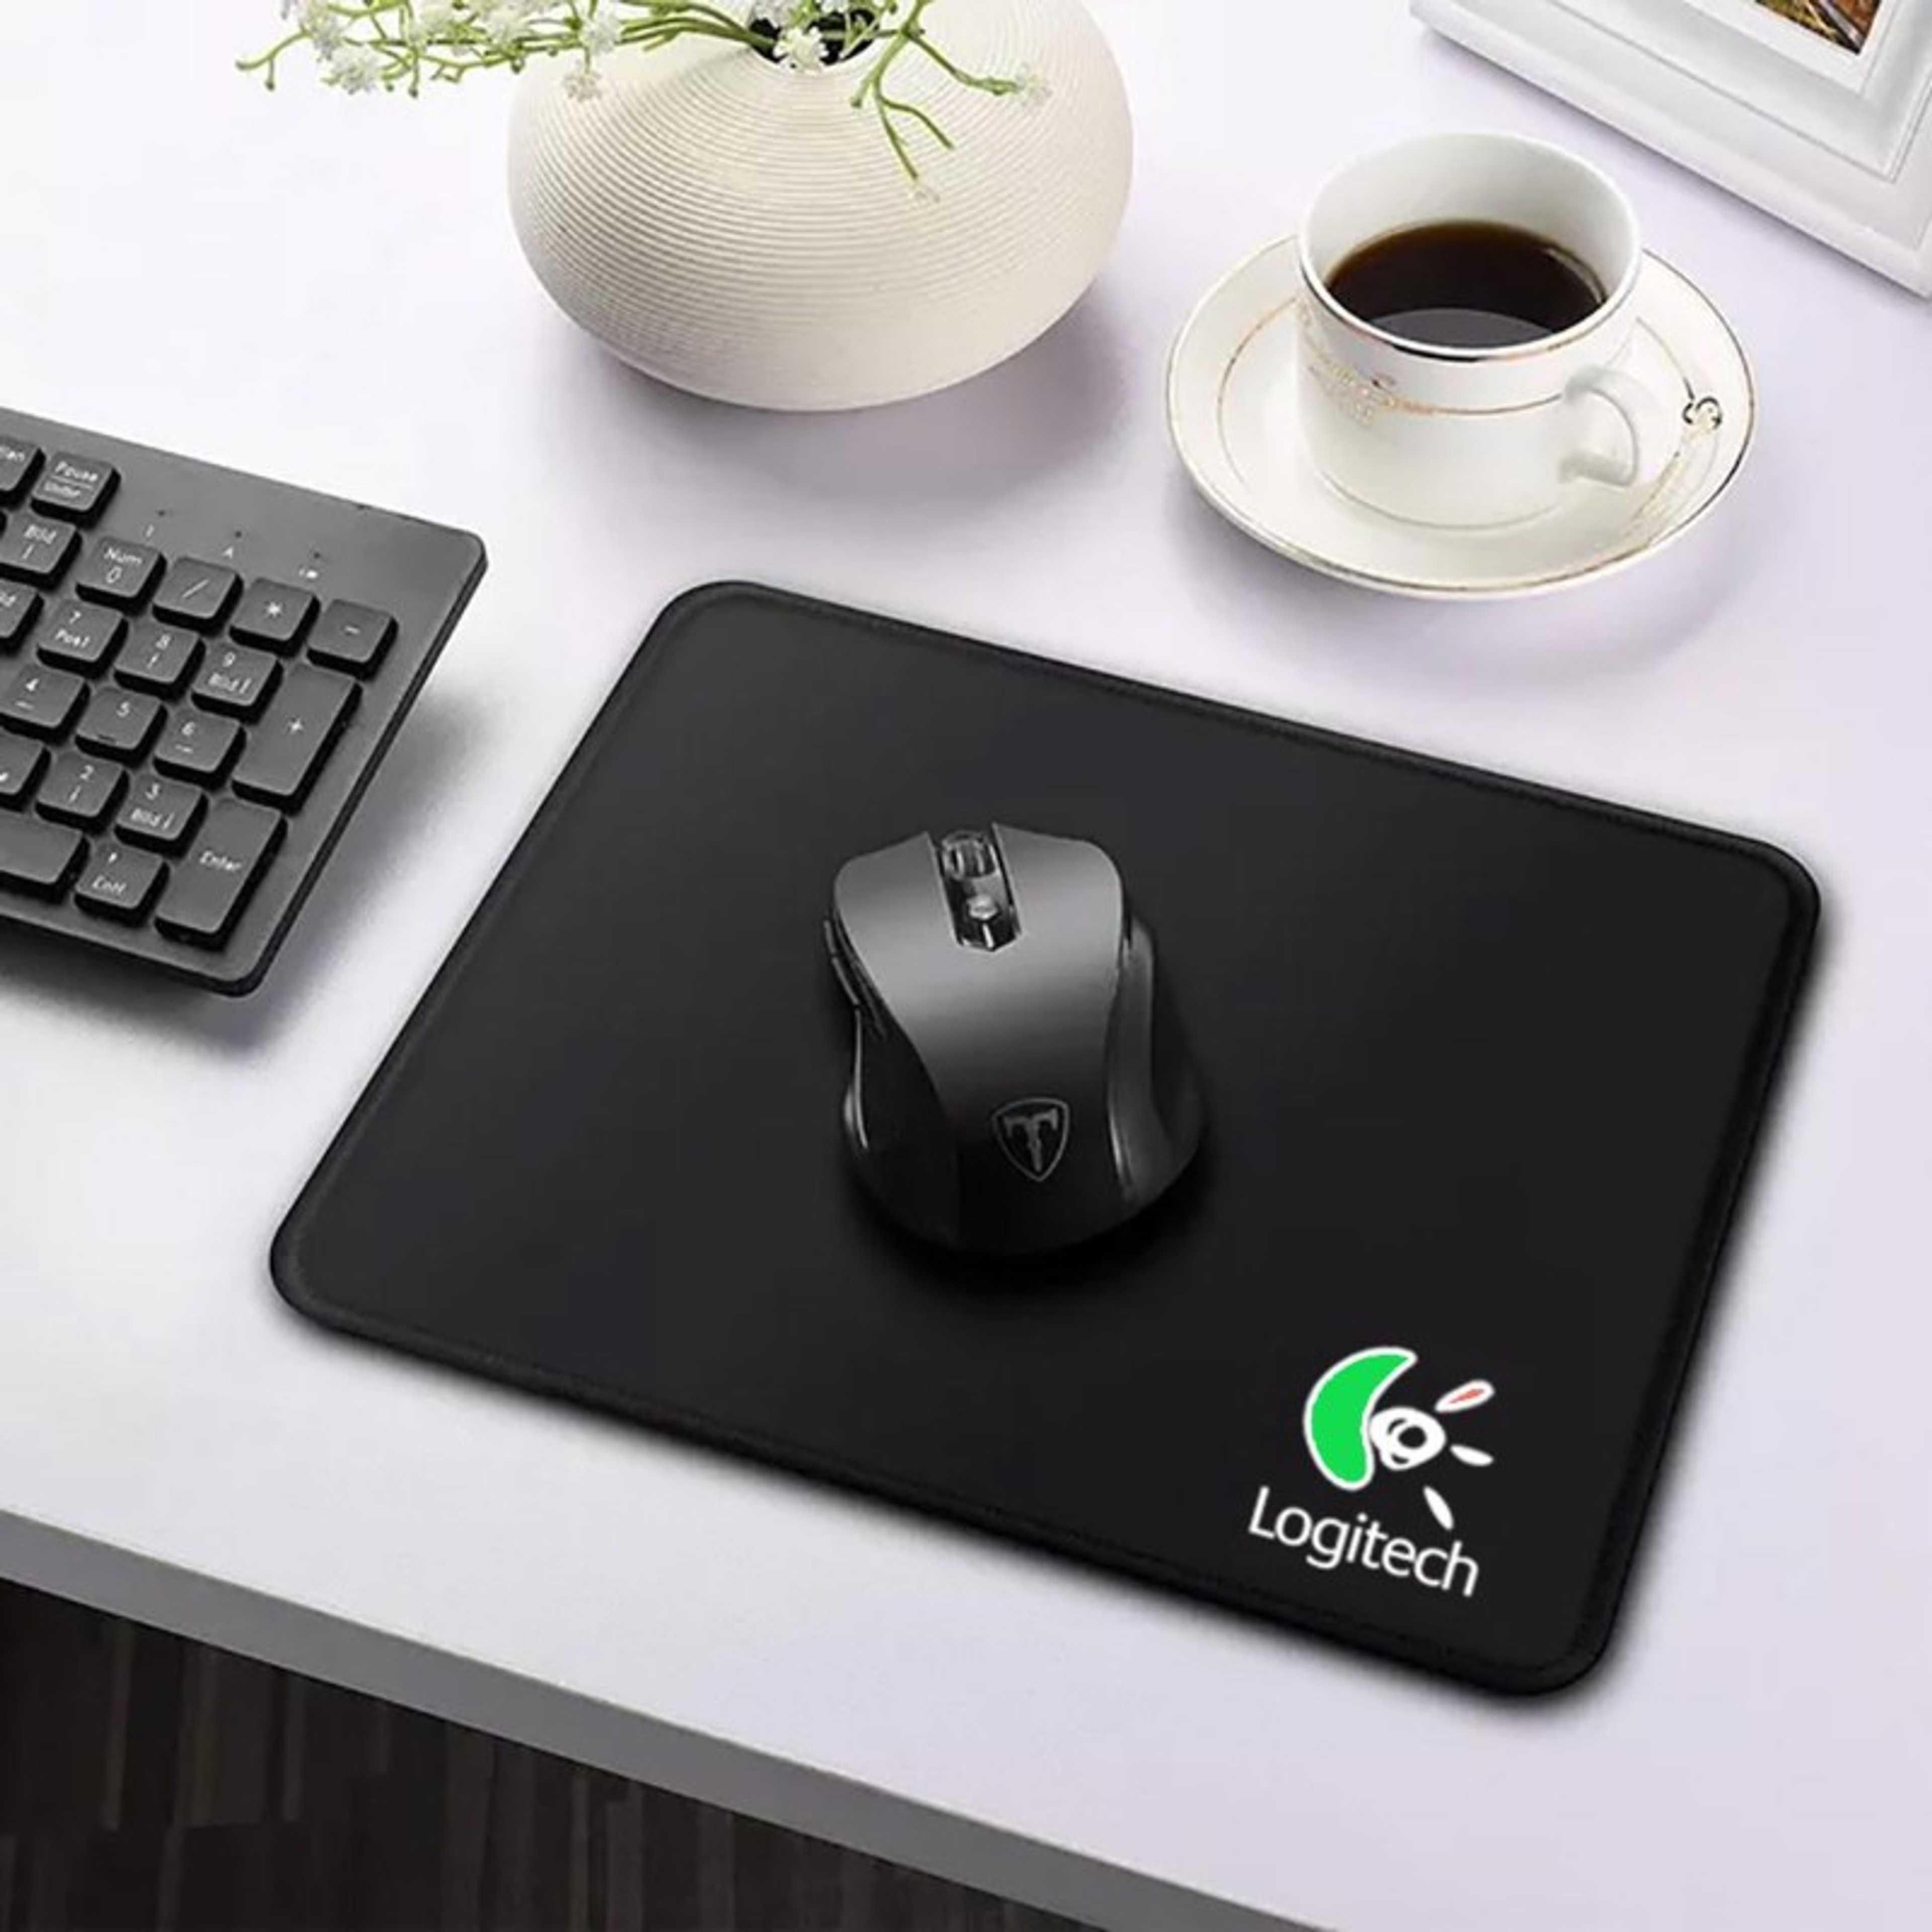 Logitech Mouse Pad Medium Size For Gaming-Office-Home Logitech / Razor / Dargon Mouse Pad. Original Mouse Pad very Smooth Cloth Surface / Computer Accessories>Mousepads